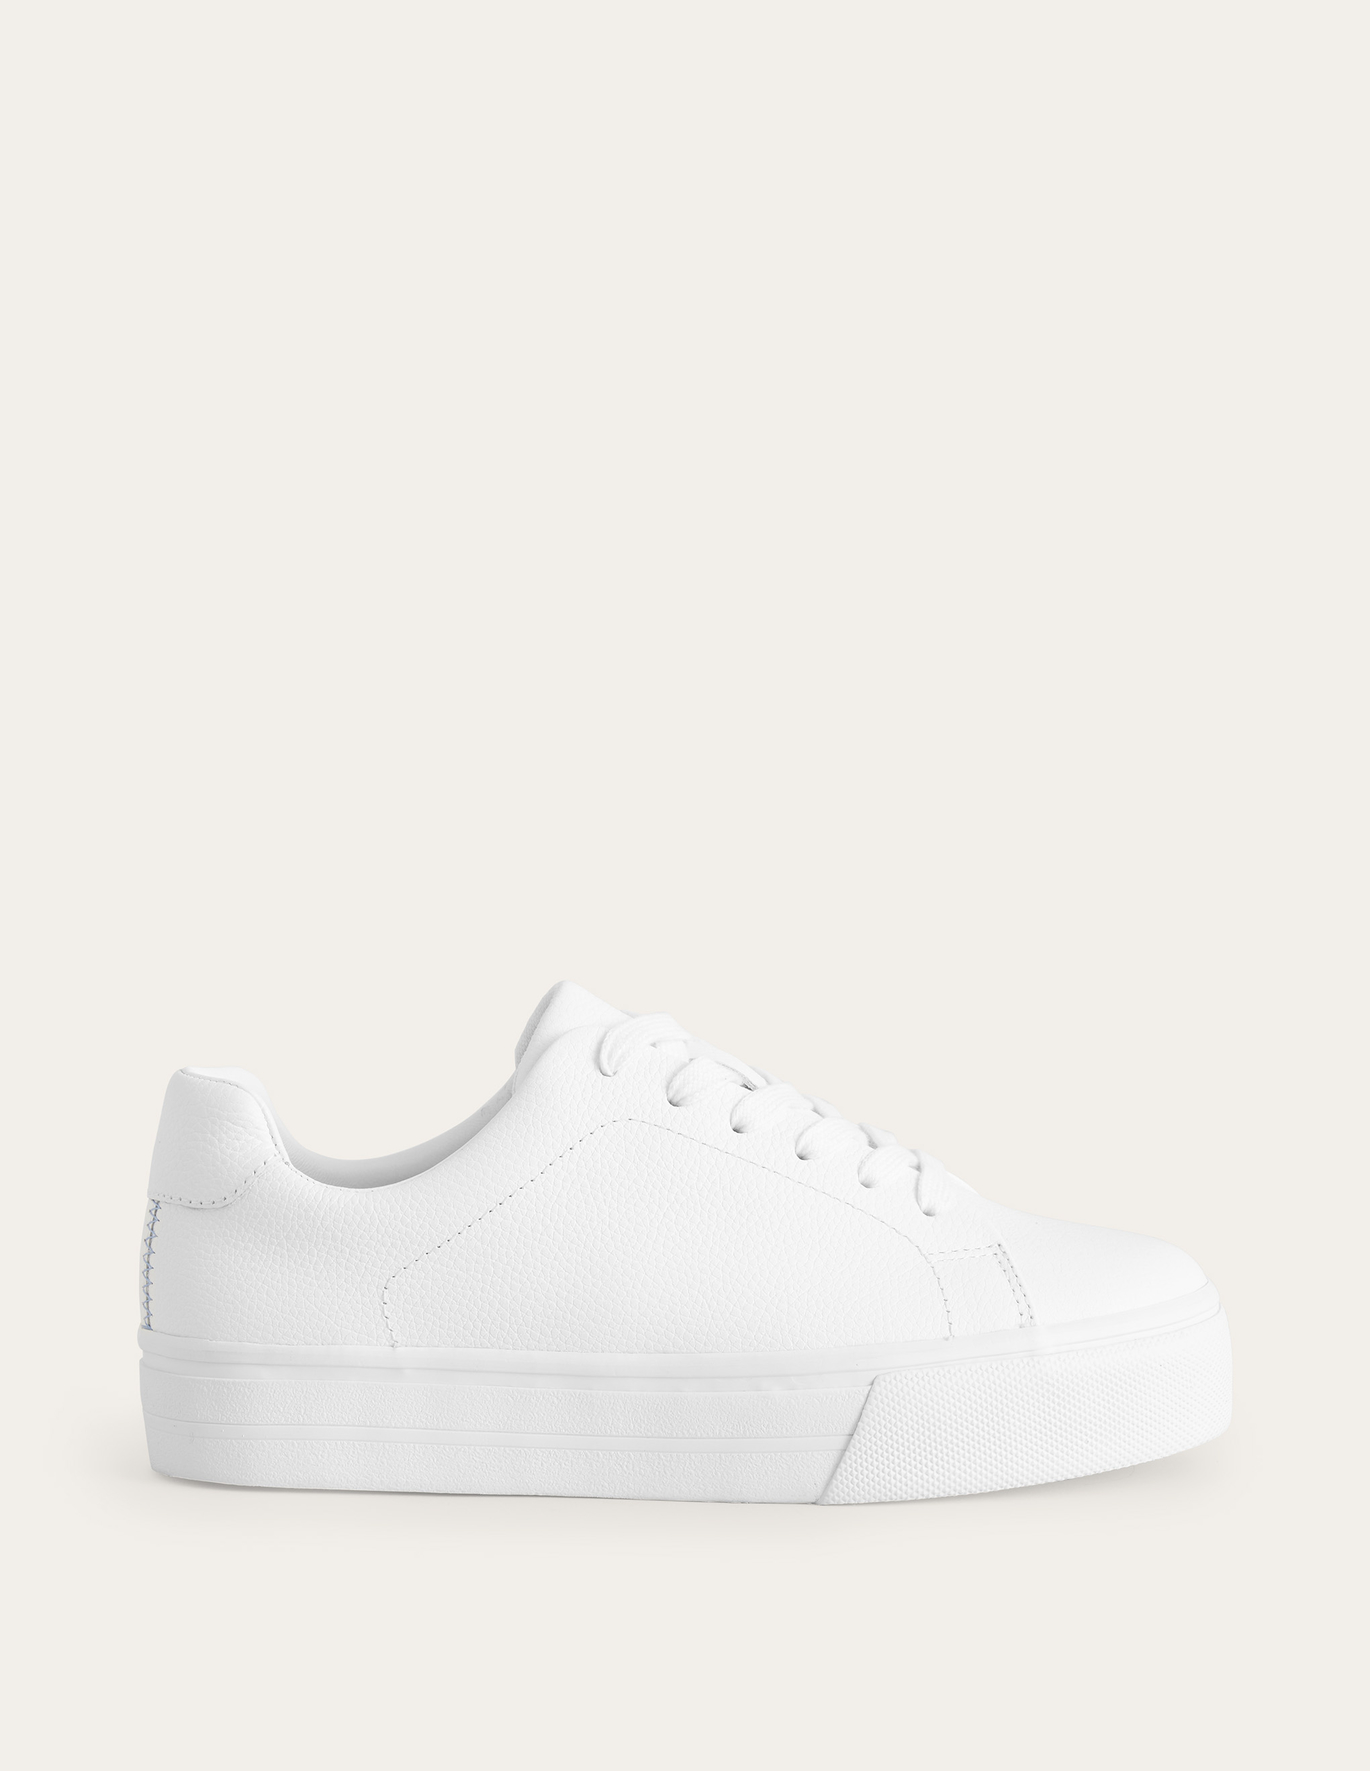 Boden Leather Flatform Trainers - White Tumbled Leather